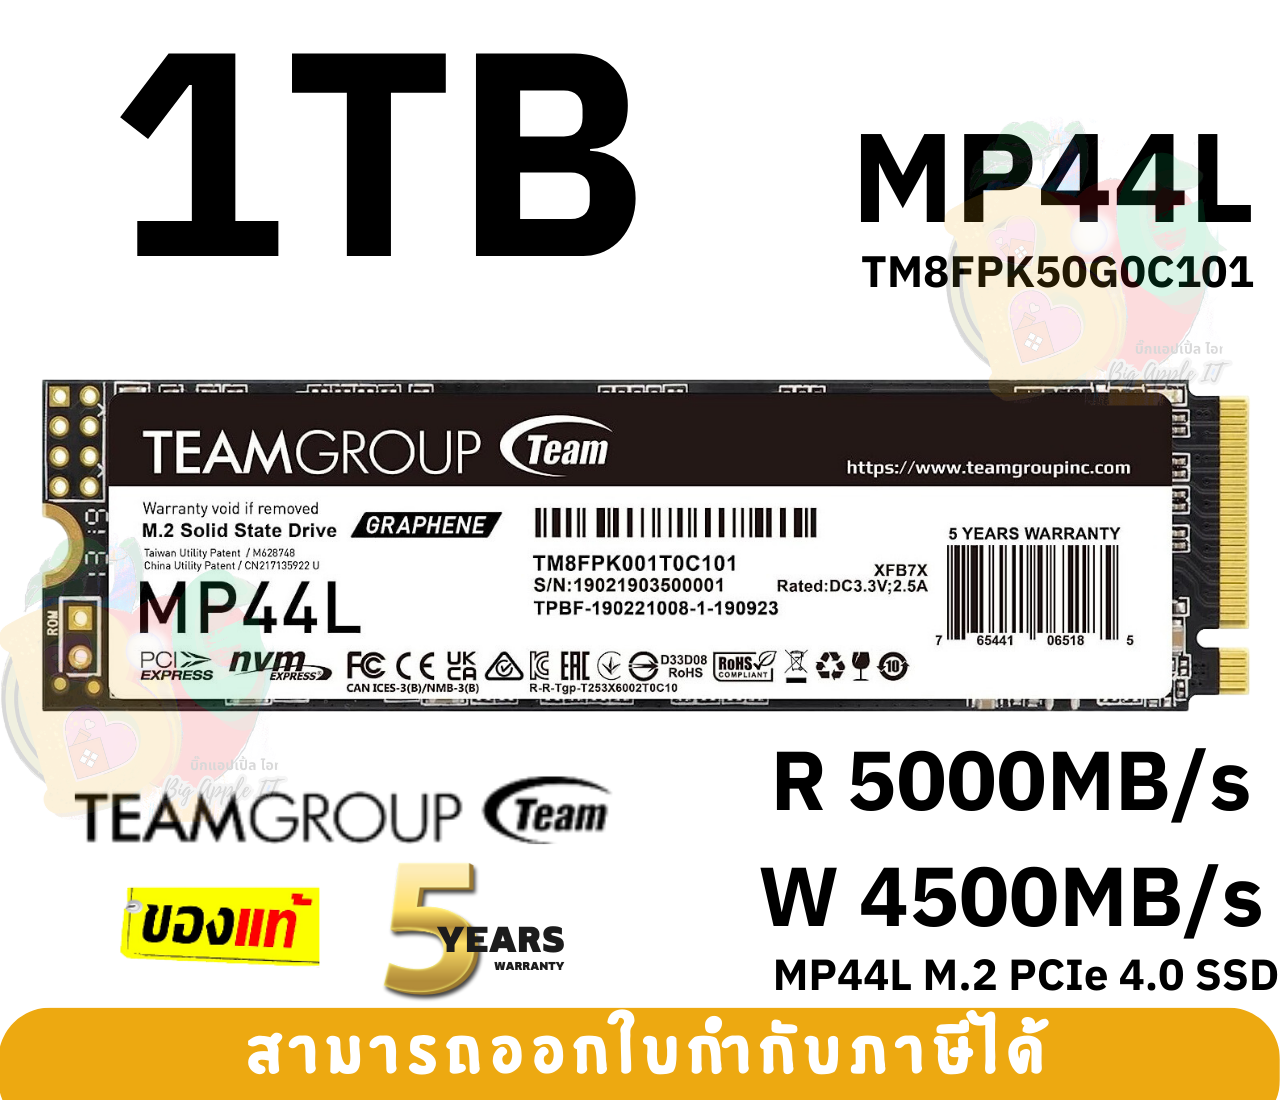 SAMSUNG 990 Pro 1TB Gen4 NVMe SSD 7450MB/s 6900MB/s R/W 1550K/1200K IOPS  600TBW 1.5M Hrs MTBF for PS5 5yrs : Electronics 